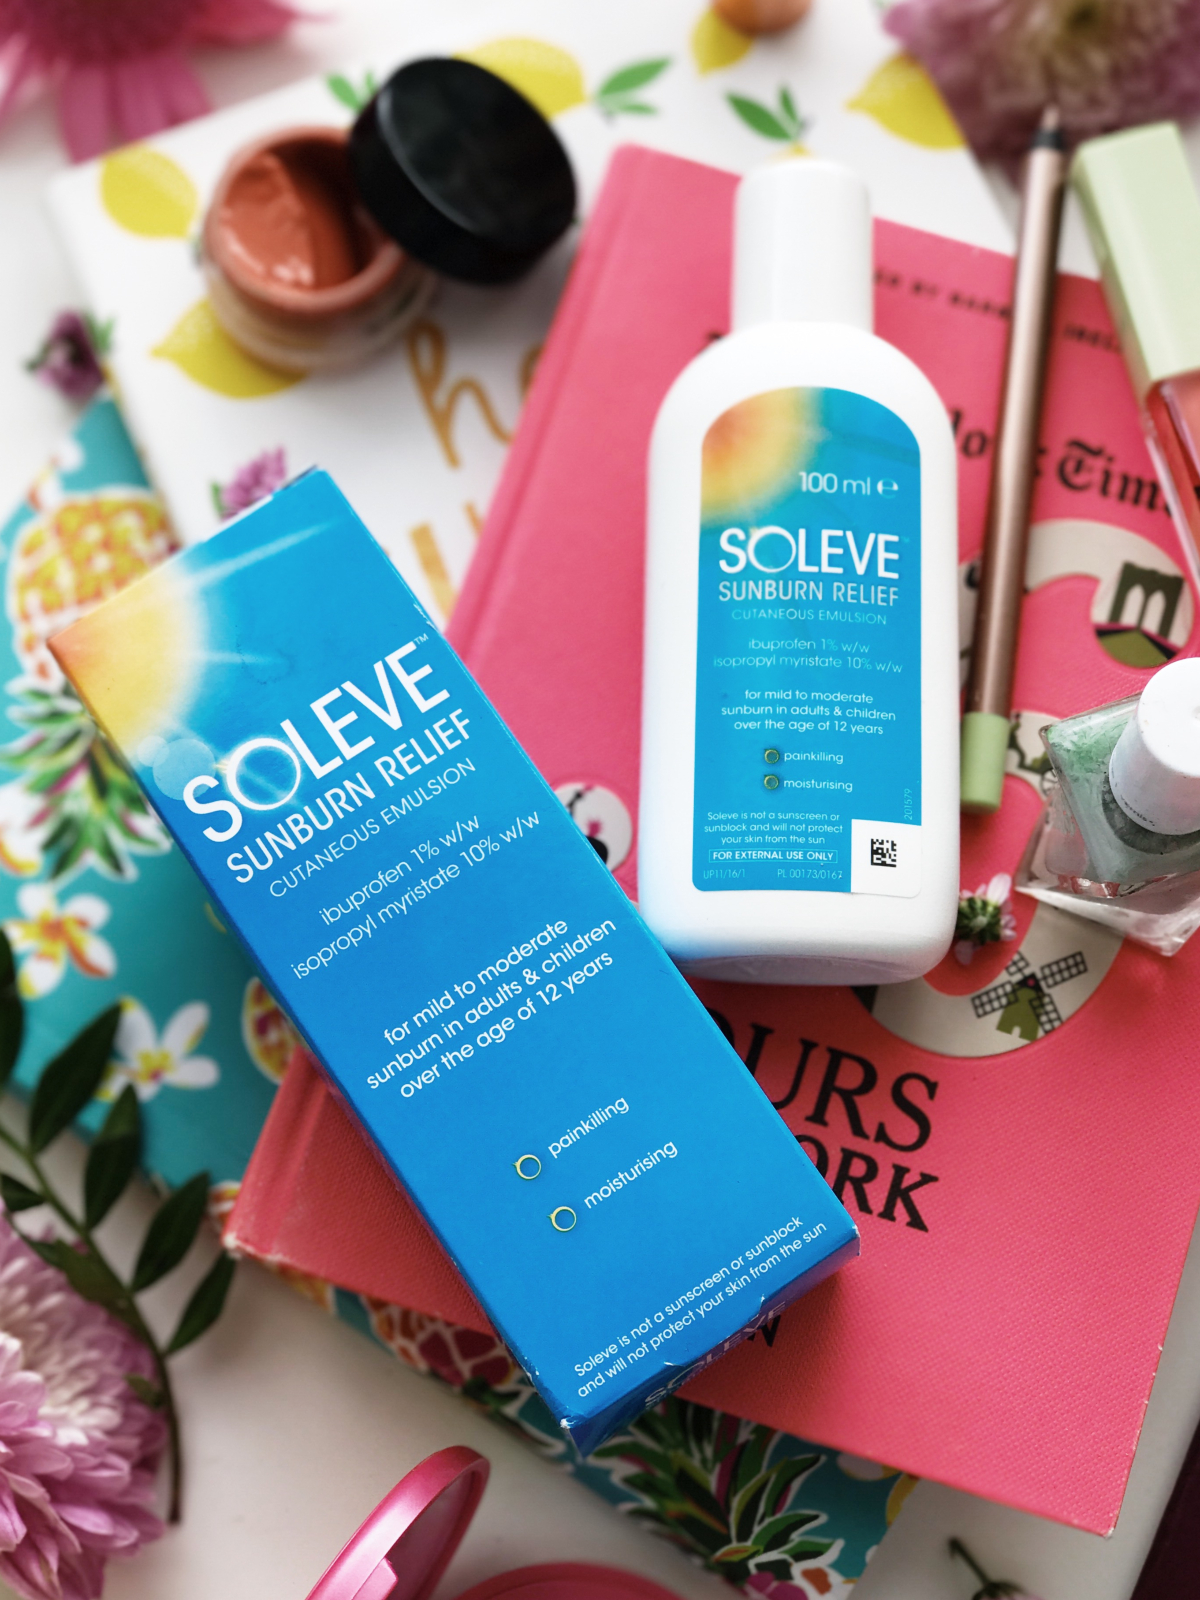 Soleve-ing Sunburn Once and For All!